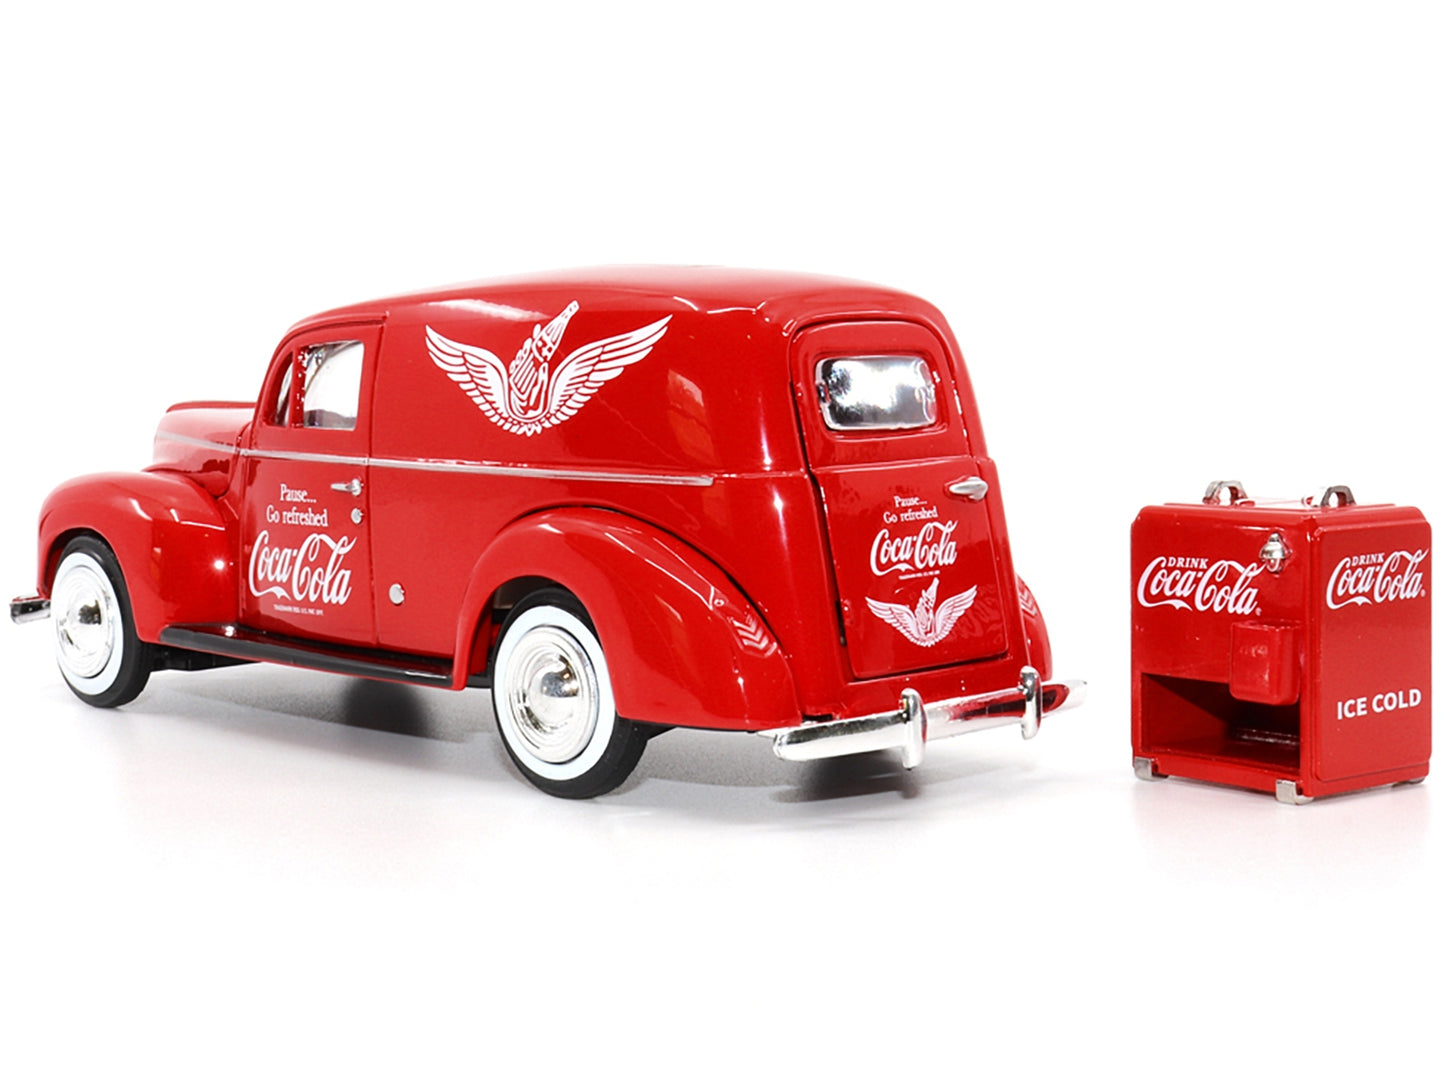 1940 Ford Sedan Cargo Van Red "Pause... Go Refreshed Coca-Cola" with Vending Machine Accessory 1/24 Diecast Model Car by Motor City Classics